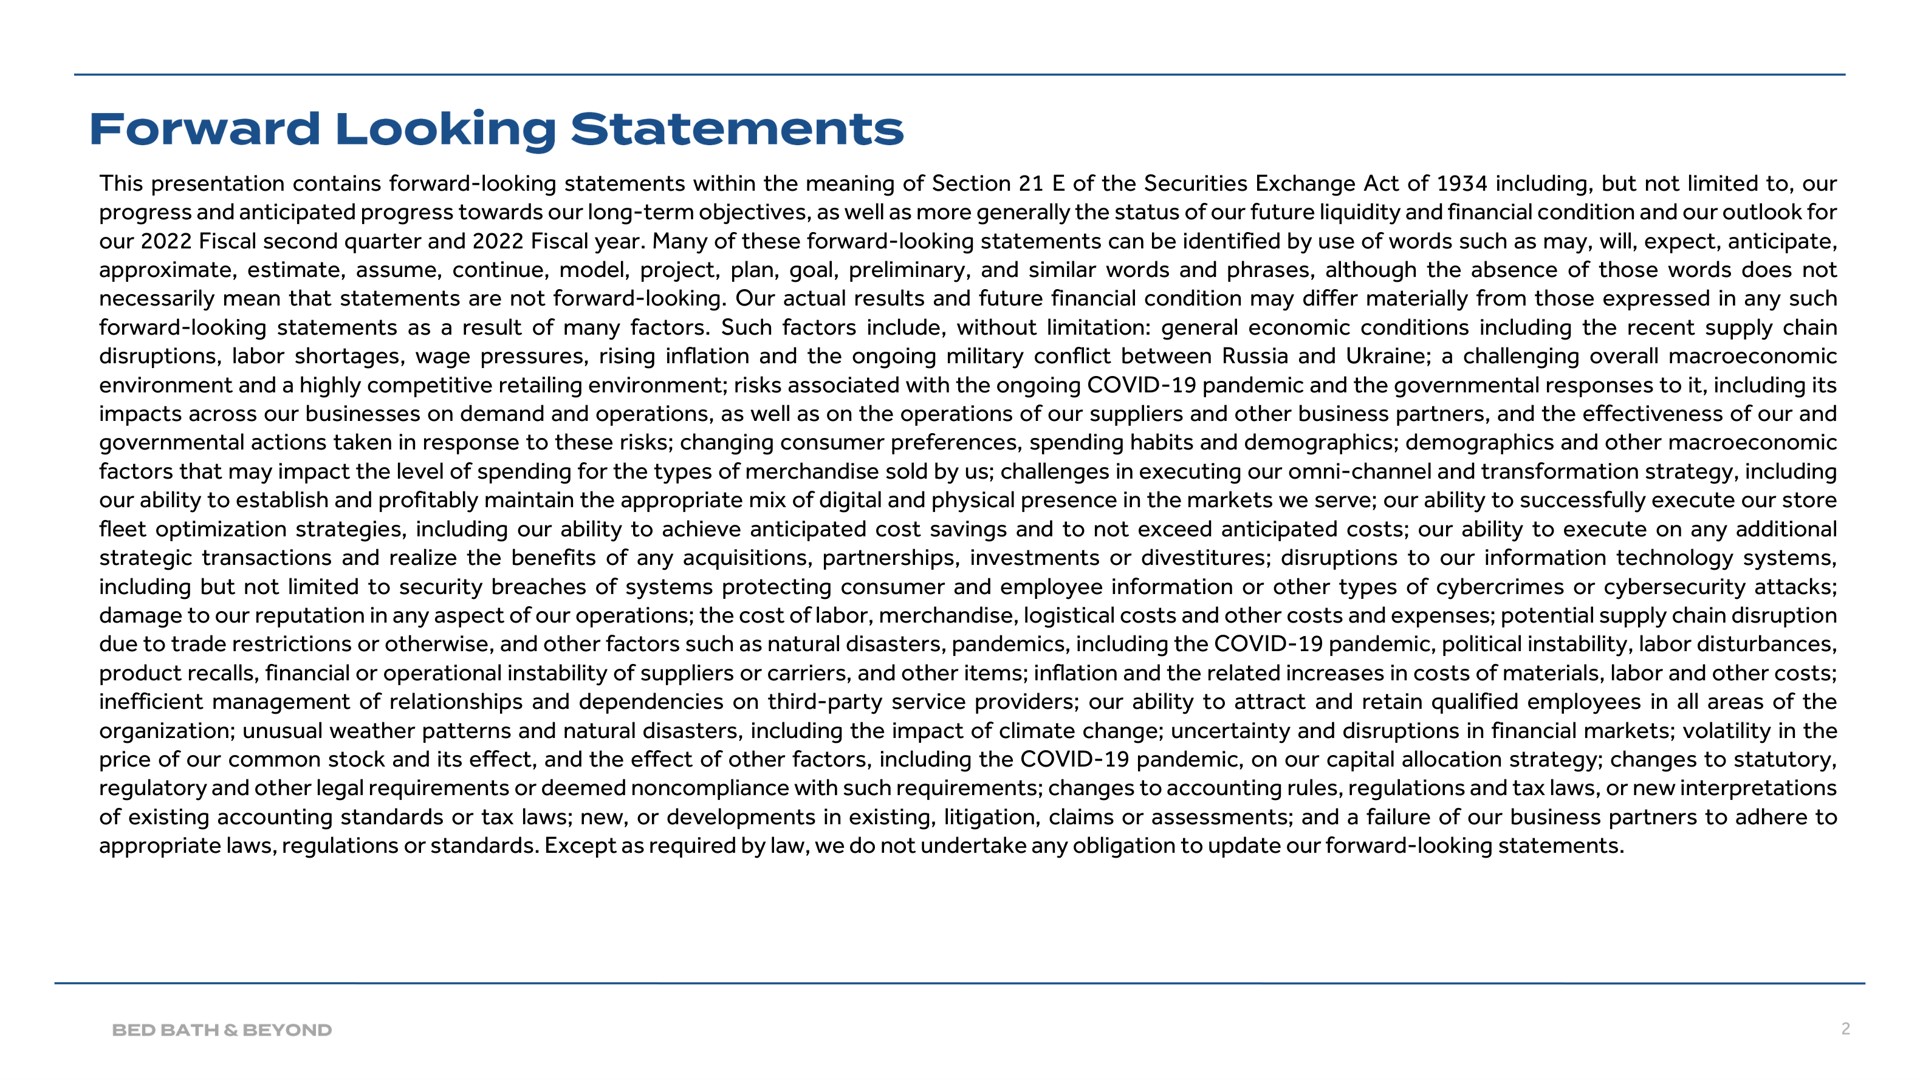 this presentation contains forward looking statements within the meaning of section of the securities exchange act of including but not limited to our progress and anticipated progress towards our long term objectives as well as more generally the status of our future liquidity and financial condition and our outlook for our fiscal second quarter and fiscal year many of these forward looking statements can be identified by use of words such as may will expect anticipate approximate estimate assume continue model project plan goal preliminary and similar words and phrases although the absence of those words does not necessarily mean that statements are not forward looking our actual results and future financial condition may differ materially from those expressed in any such forward looking statements as a result of many factors such factors include without limitation general economic conditions including the recent supply chain disruptions labor shortages wage pressures rising inflation and the ongoing military conflict between russia and a challenging overall environment and a highly competitive retailing environment risks associated with the ongoing covid pandemic and the governmental responses to it including its impacts across our businesses on demand and operations as well as on the operations of our suppliers and other business partners and the effectiveness of our and governmental actions taken in response to these risks changing consumer preferences spending habits and demographics demographics and other factors that may impact the level of spending for the types of merchandise sold by us challenges in executing our channel and transformation strategy including our ability to establish and profitably maintain the appropriate mix of digital and physical presence in the markets we serve our ability to successfully execute our store fleet optimization strategies including our ability to achieve anticipated cost savings and to not exceed anticipated costs our ability to execute on any additional strategic transactions and realize the benefits of any acquisitions partnerships investments or divestitures disruptions to our information technology systems including but not limited to security breaches of systems protecting consumer and employee information or other types of or attacks damage to our reputation in any aspect of our operations the cost of labor merchandise logistical costs and other costs and expenses potential supply chain disruption due to trade restrictions or otherwise and other factors such as natural disasters pandemics including the covid pandemic political instability labor disturbances product recalls financial or operational instability of suppliers or carriers and other items inflation and the related increases in costs of materials labor and other costs inefficient management of relationships and dependencies on third party service providers our ability to attract and retain qualified employees in all areas of the organization unusual weather patterns and natural disasters including the impact of climate change uncertainty and disruptions in financial markets volatility in the price of our common stock and its effect and the effect of other factors including the covid pandemic on our capital allocation strategy changes to statutory regulatory and other legal requirements or deemed noncompliance with such requirements changes to accounting rules regulations and tax laws or new interpretations of existing accounting standards or tax laws new or developments in existing litigation claims or assessments and a failure of our business partners to adhere to appropriate laws regulations or standards except as required by law we do not undertake any obligation to update our forward looking statements forward looking | Bed Bath & Beyond